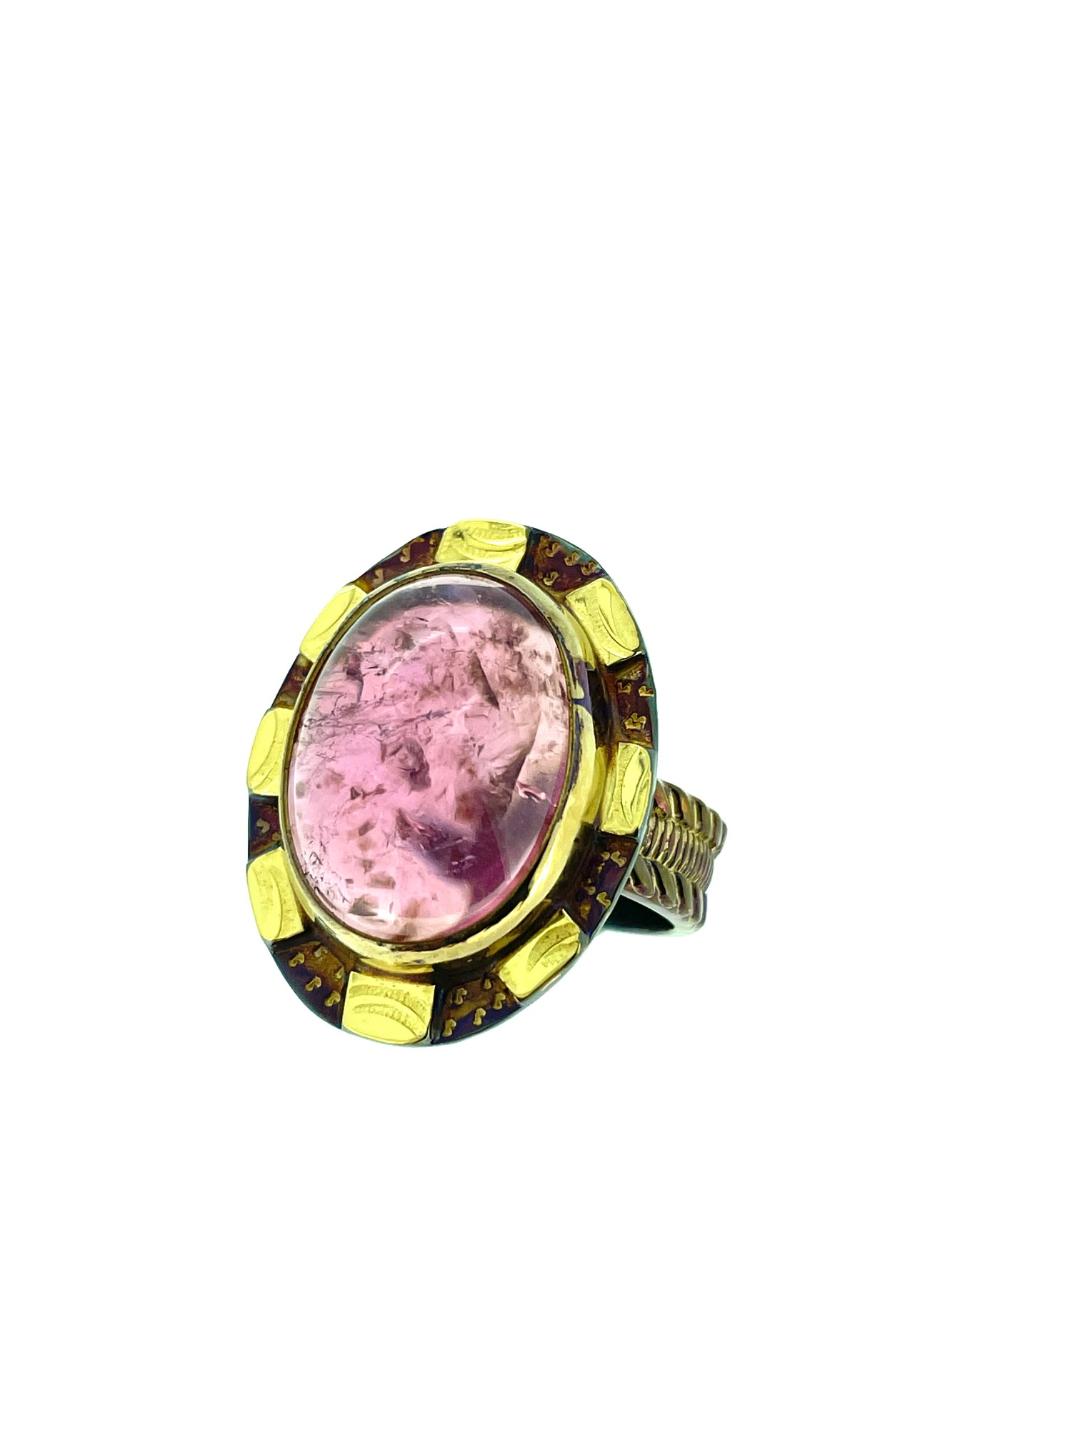 Glorious Pink Tourmaline Ring in Sterling Silver and 22k Gold, Size 7